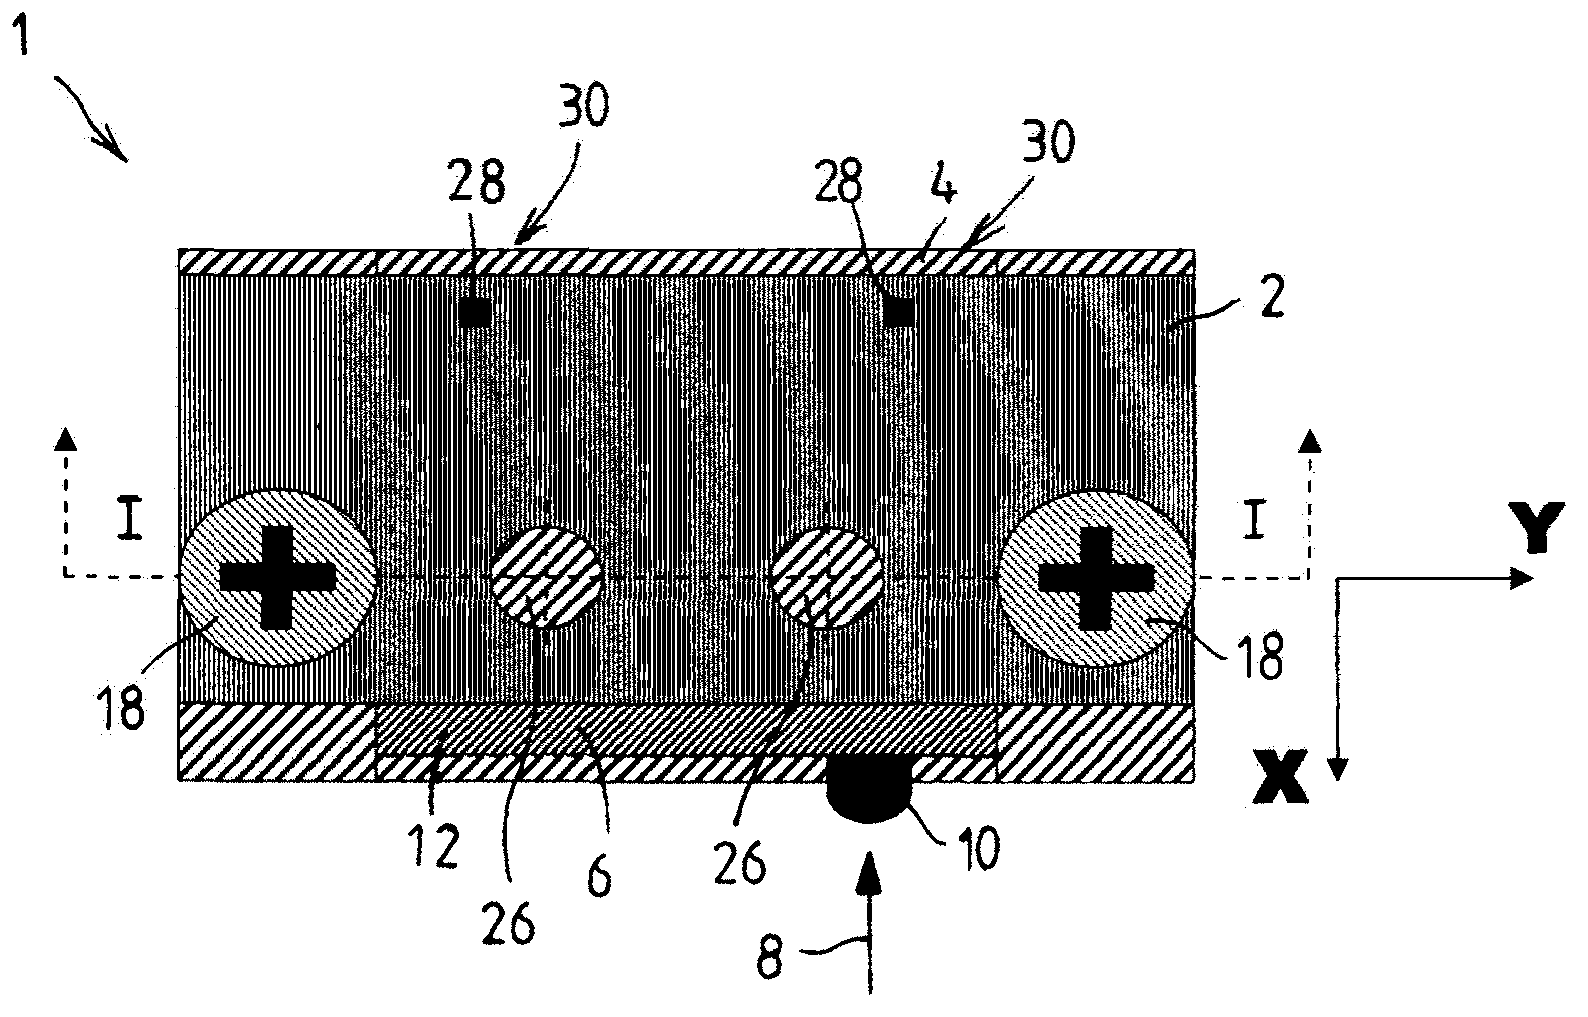 Printed circuit board arrangement having a microswitch clamped between a printed circuit board and a printed circuit board carrier